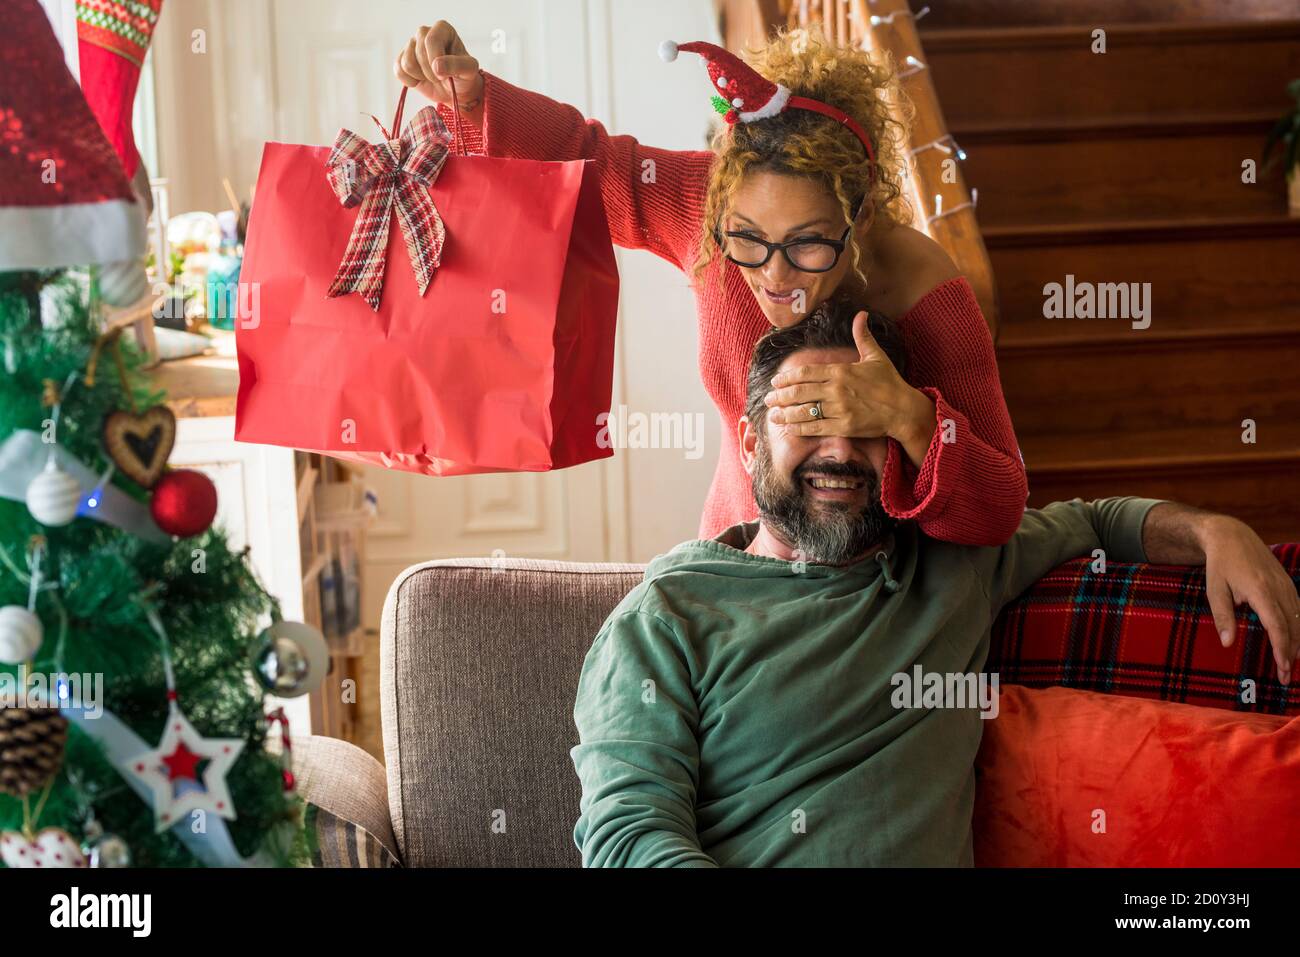 Christmas time and holiday season concept with happy people couple at home in surprise and gift presents exchange - happiness and joyful with woman an Stock Photo